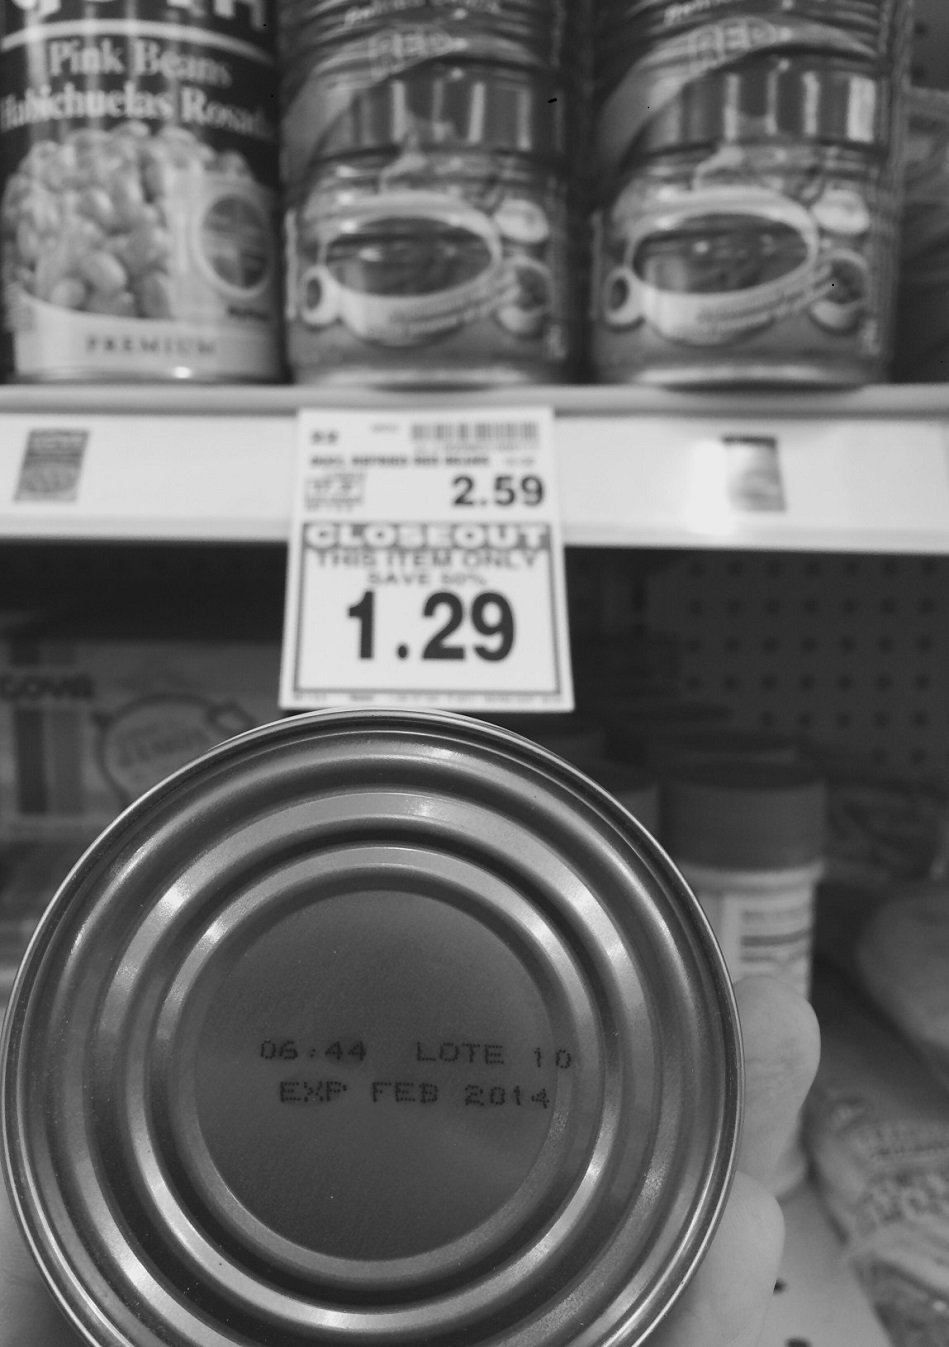 Use By, Best By, Sell By: Understanding Food Expiration Dates